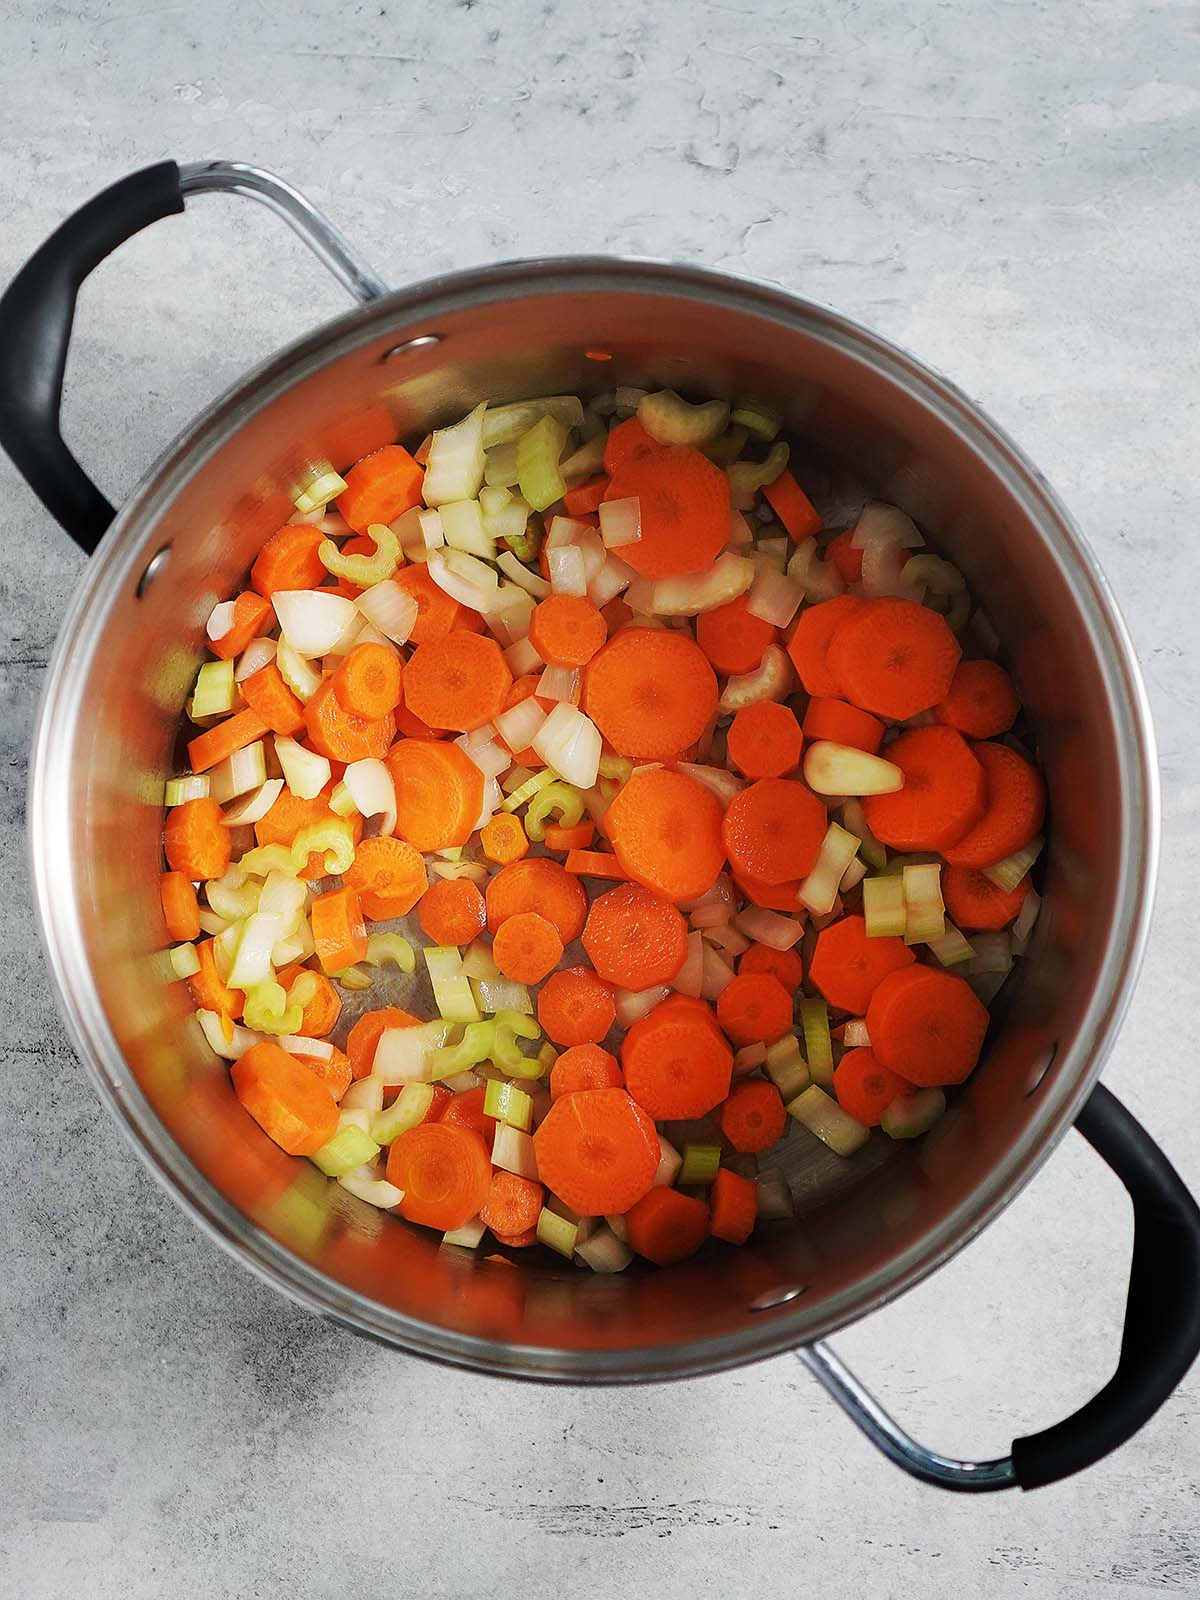 Sauteing onions, celery and carrots in a large stockpot.